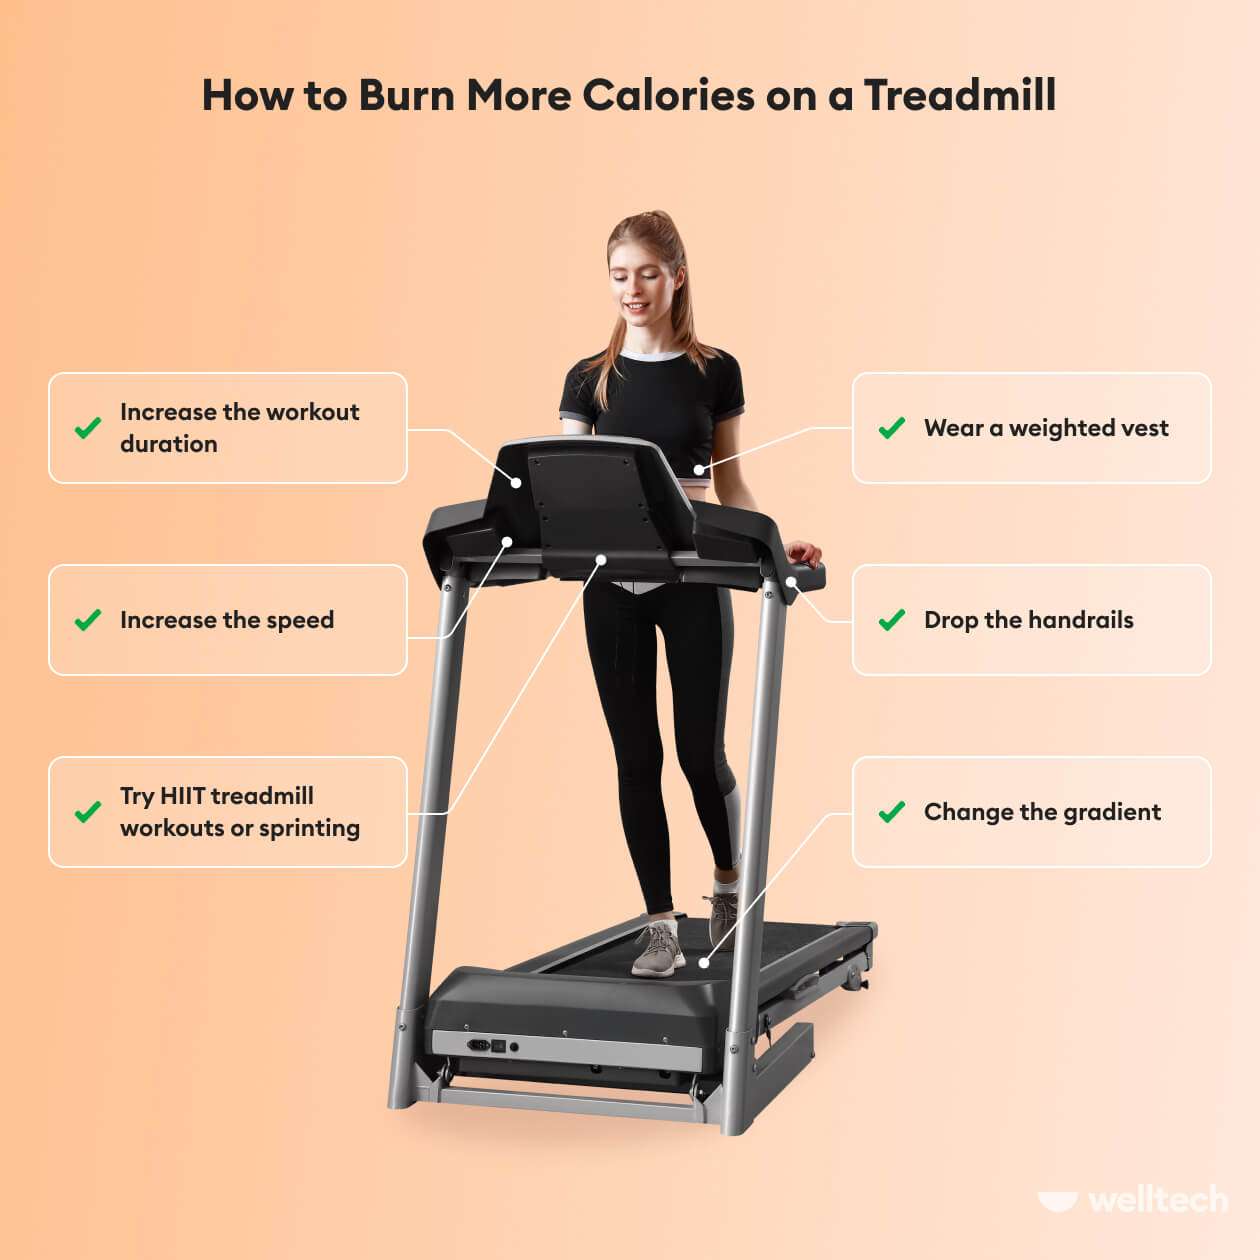 a woman is walking on a treadmill, text blocks are illustrating the tips on how to burn more calories on a treadmill, treadmill calorie calculator